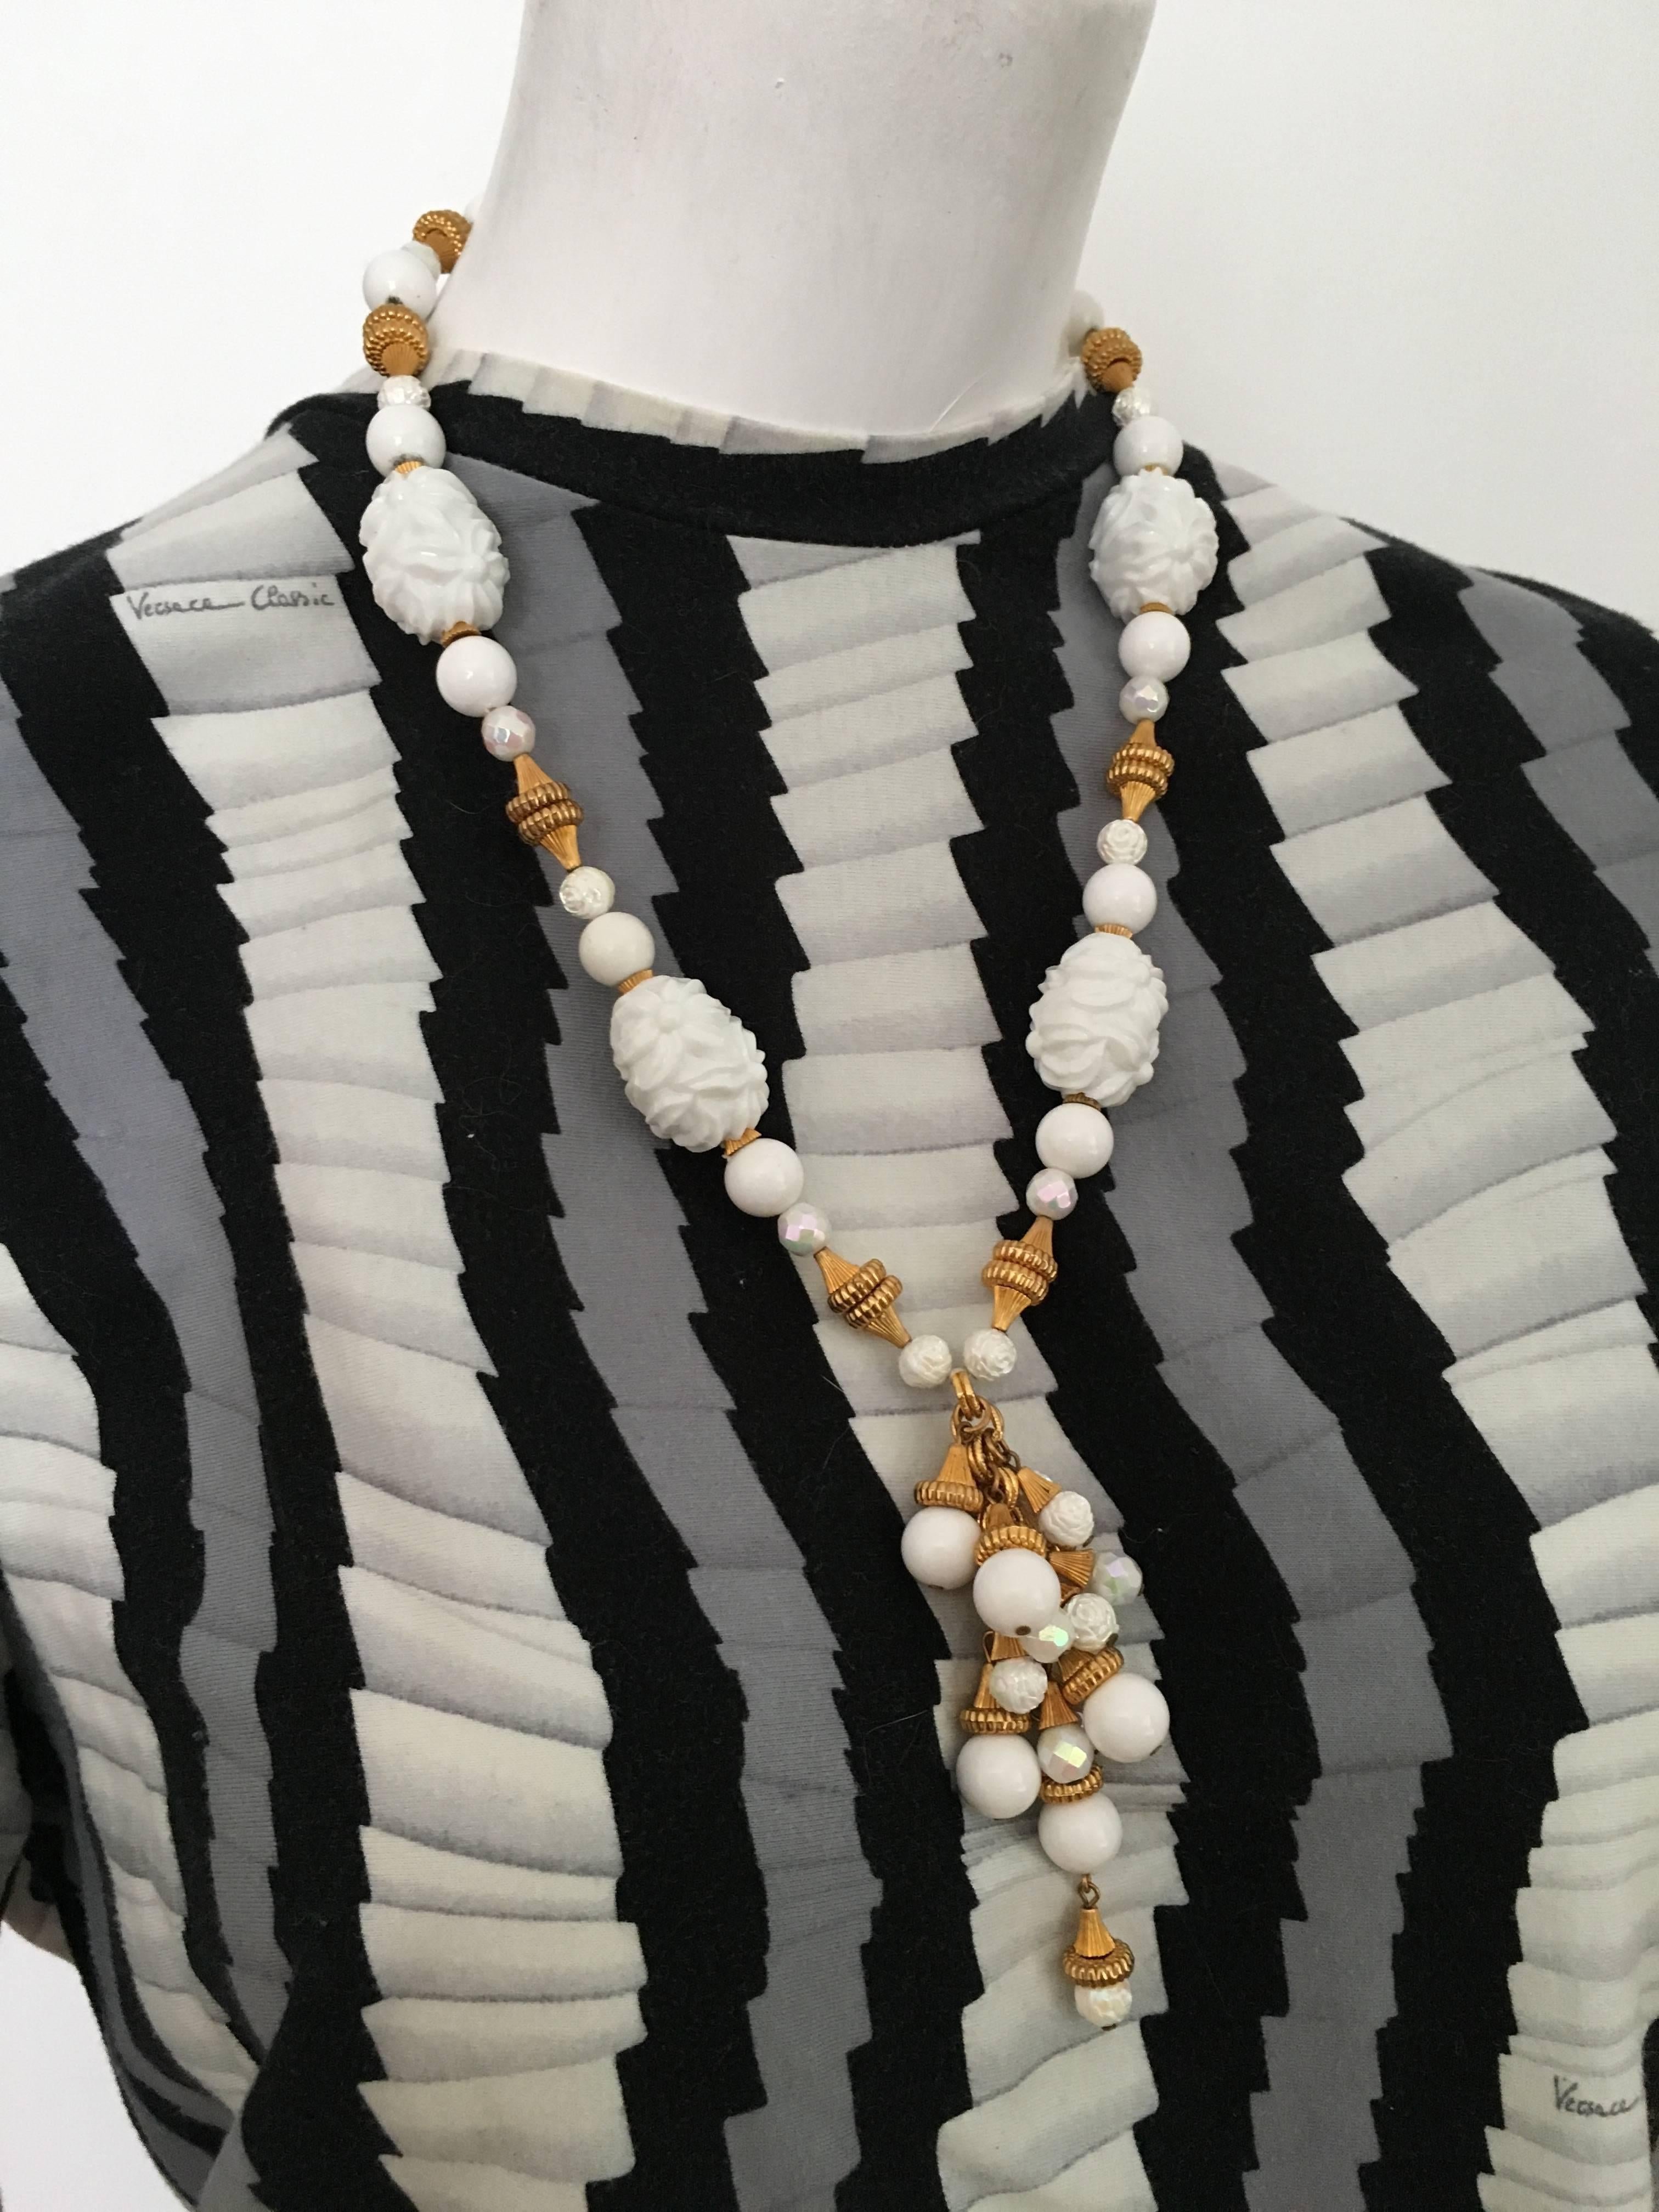 Aesthetic Movement Hattie Carnegie Necklace With Tassel Pendant, 1950s  For Sale